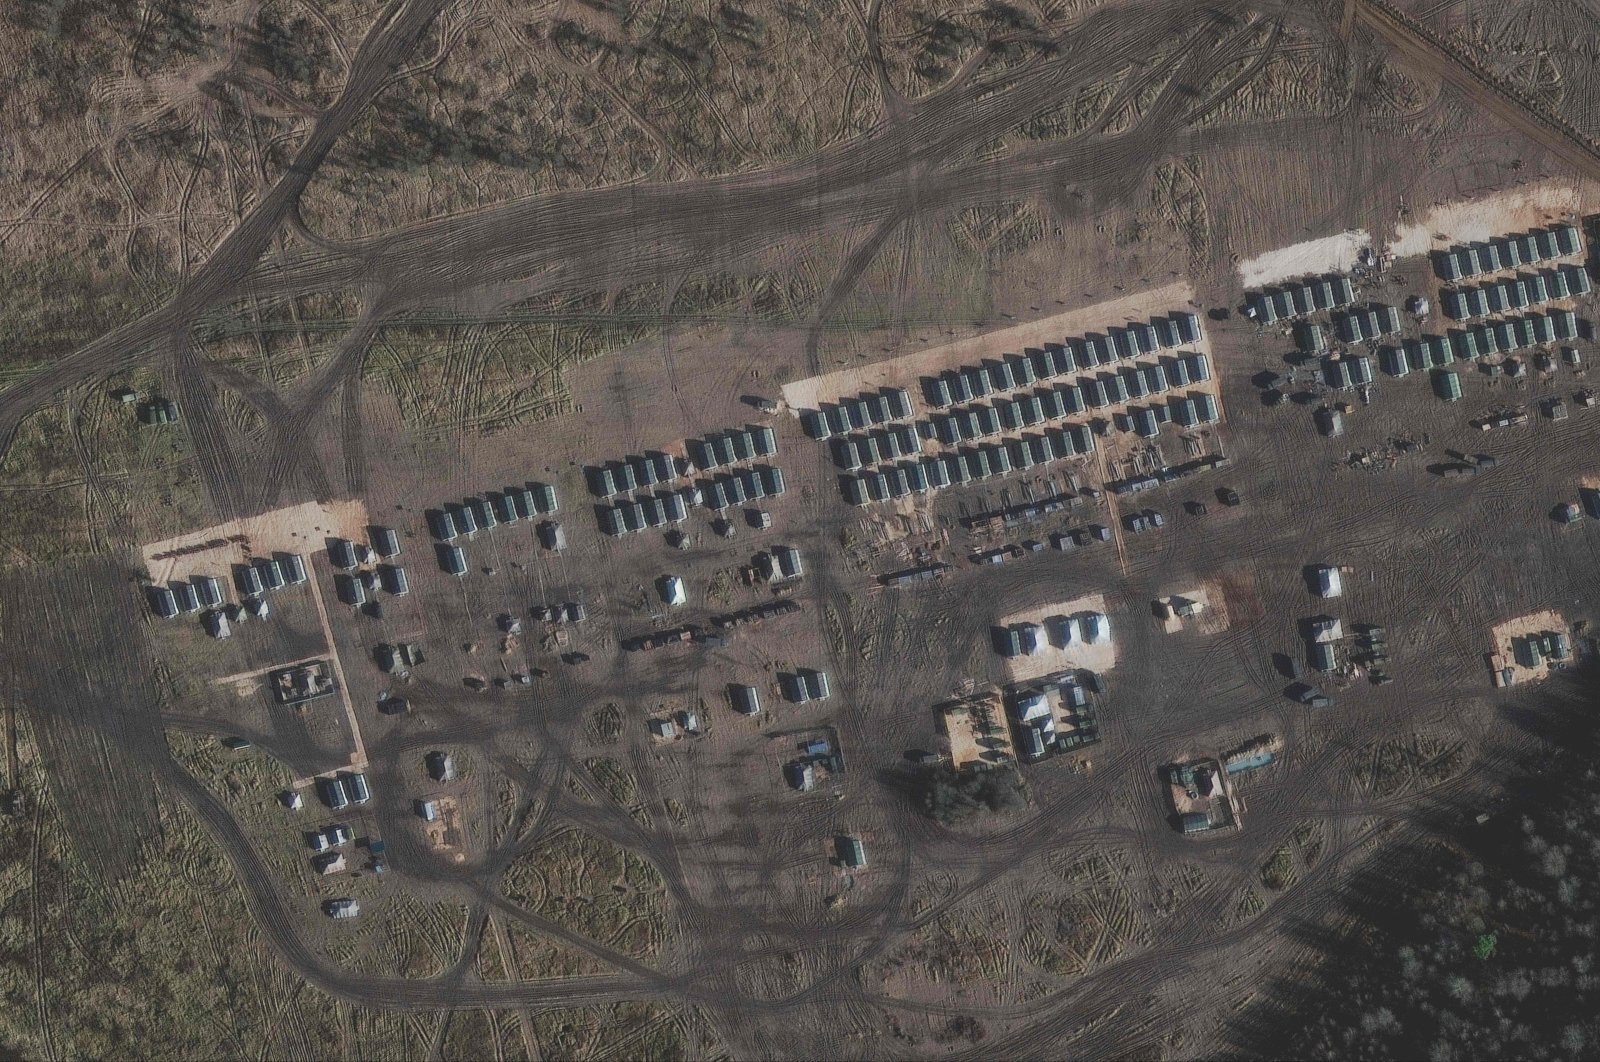 This handout satellite image released by Maxar Technologies and taken on Nov. 1, 2021, shows troop tents and an administrative area amid the presence of a large number of ground forces deployed on the northern edge of the town of Yelnya, Smolensk Oblast, Russia. (Satellite image ©2021 Maxar Technologies / AFP)